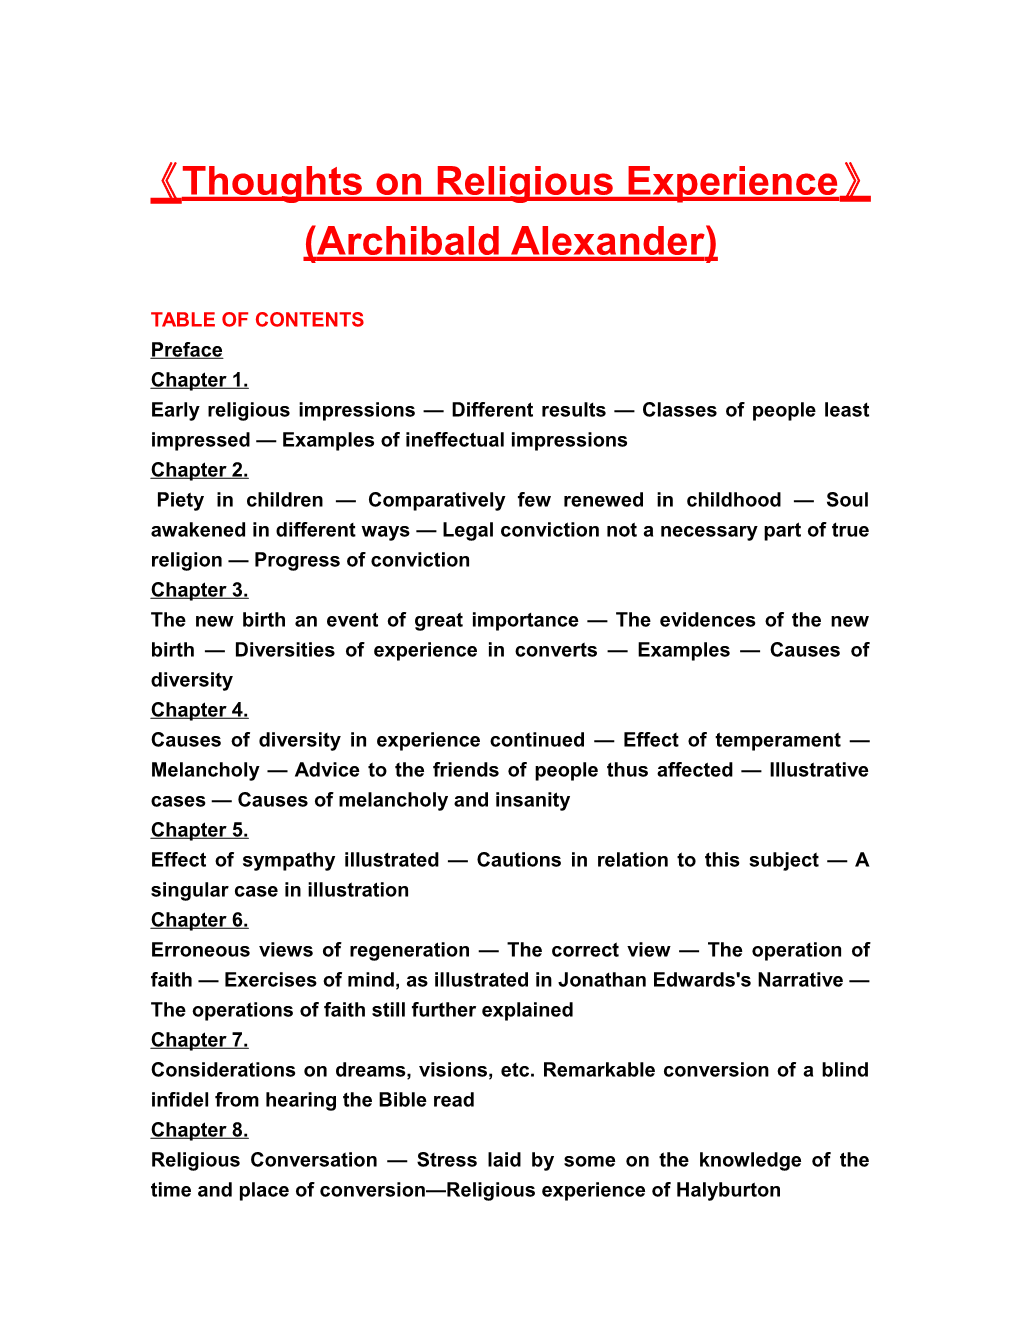 Thoughts on Religious Experience (Archibald Alexander)